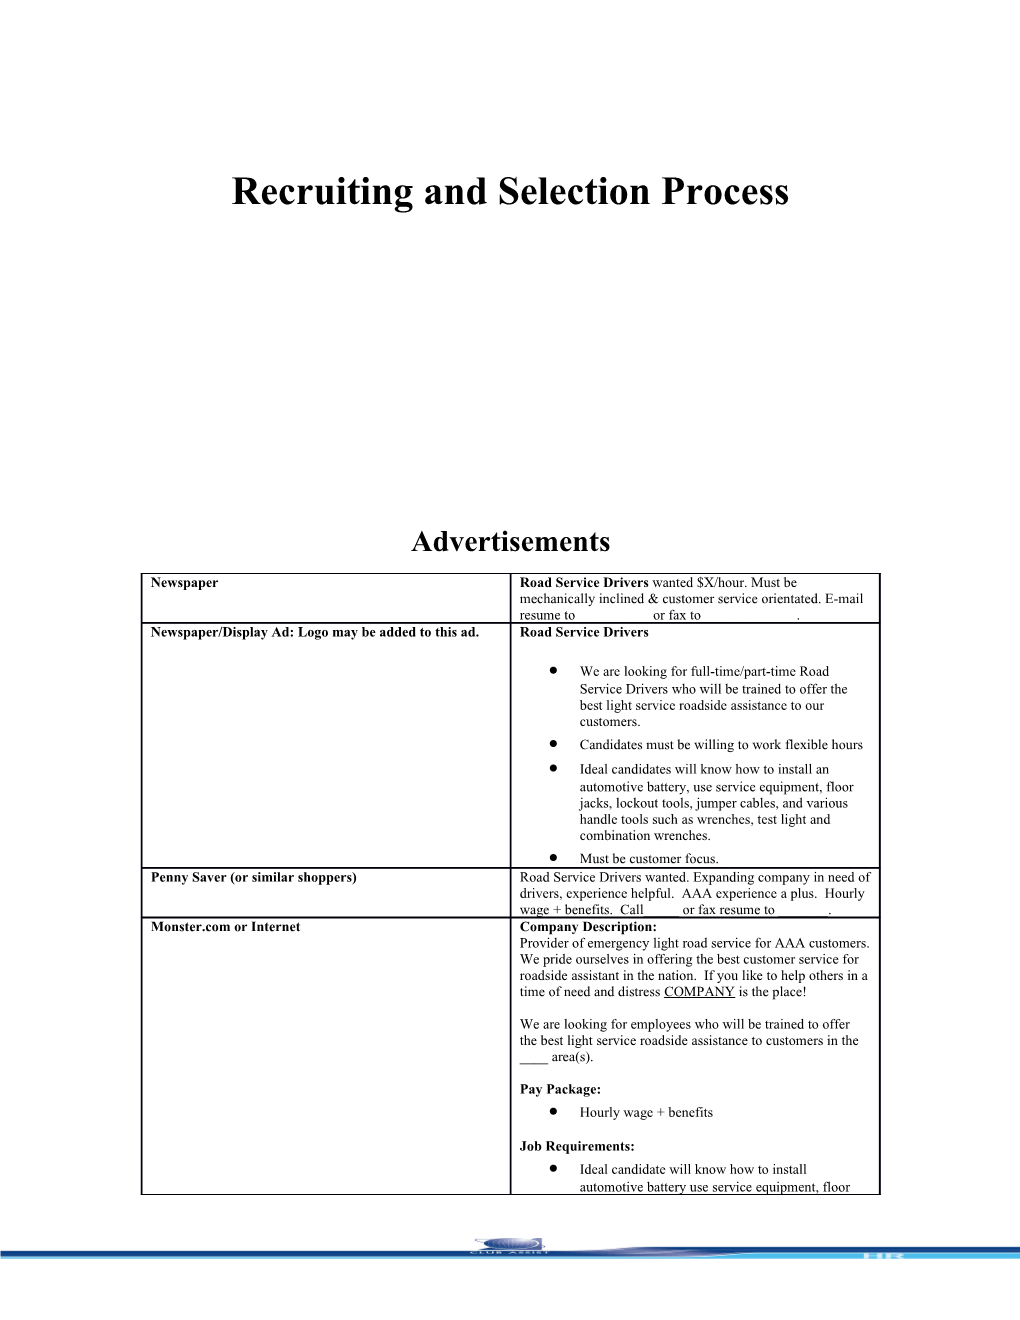 Recruiting and Selection Process